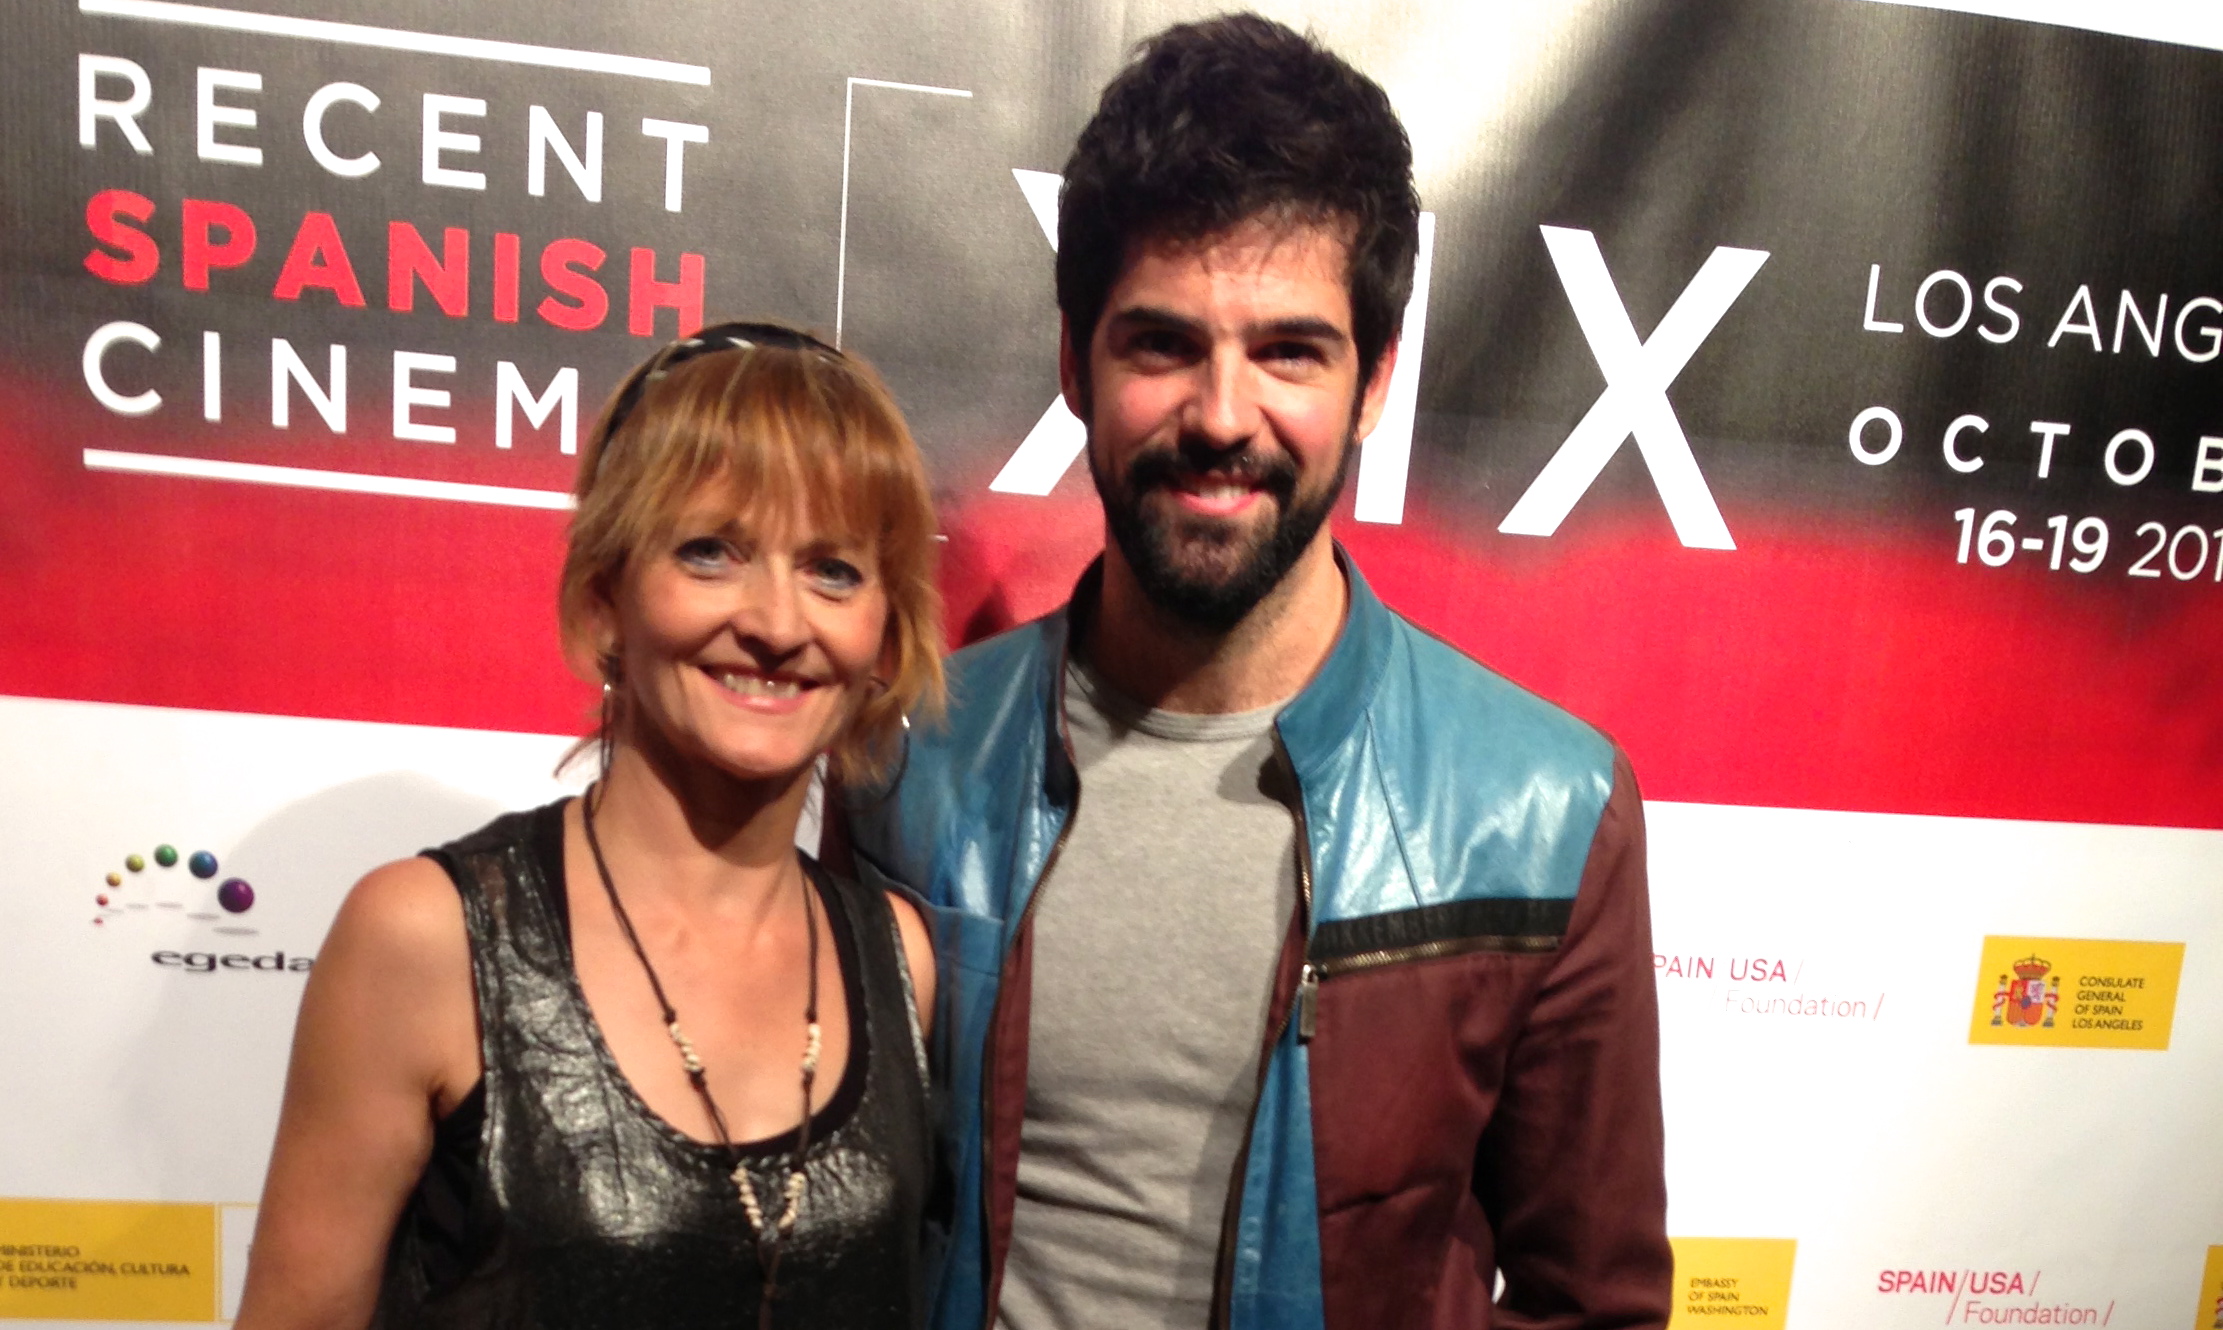 Azucena De La Fuente and Miguel Angel Munoz at event Recent Spanish Cinema at the Egyptian Theater in Hollywood